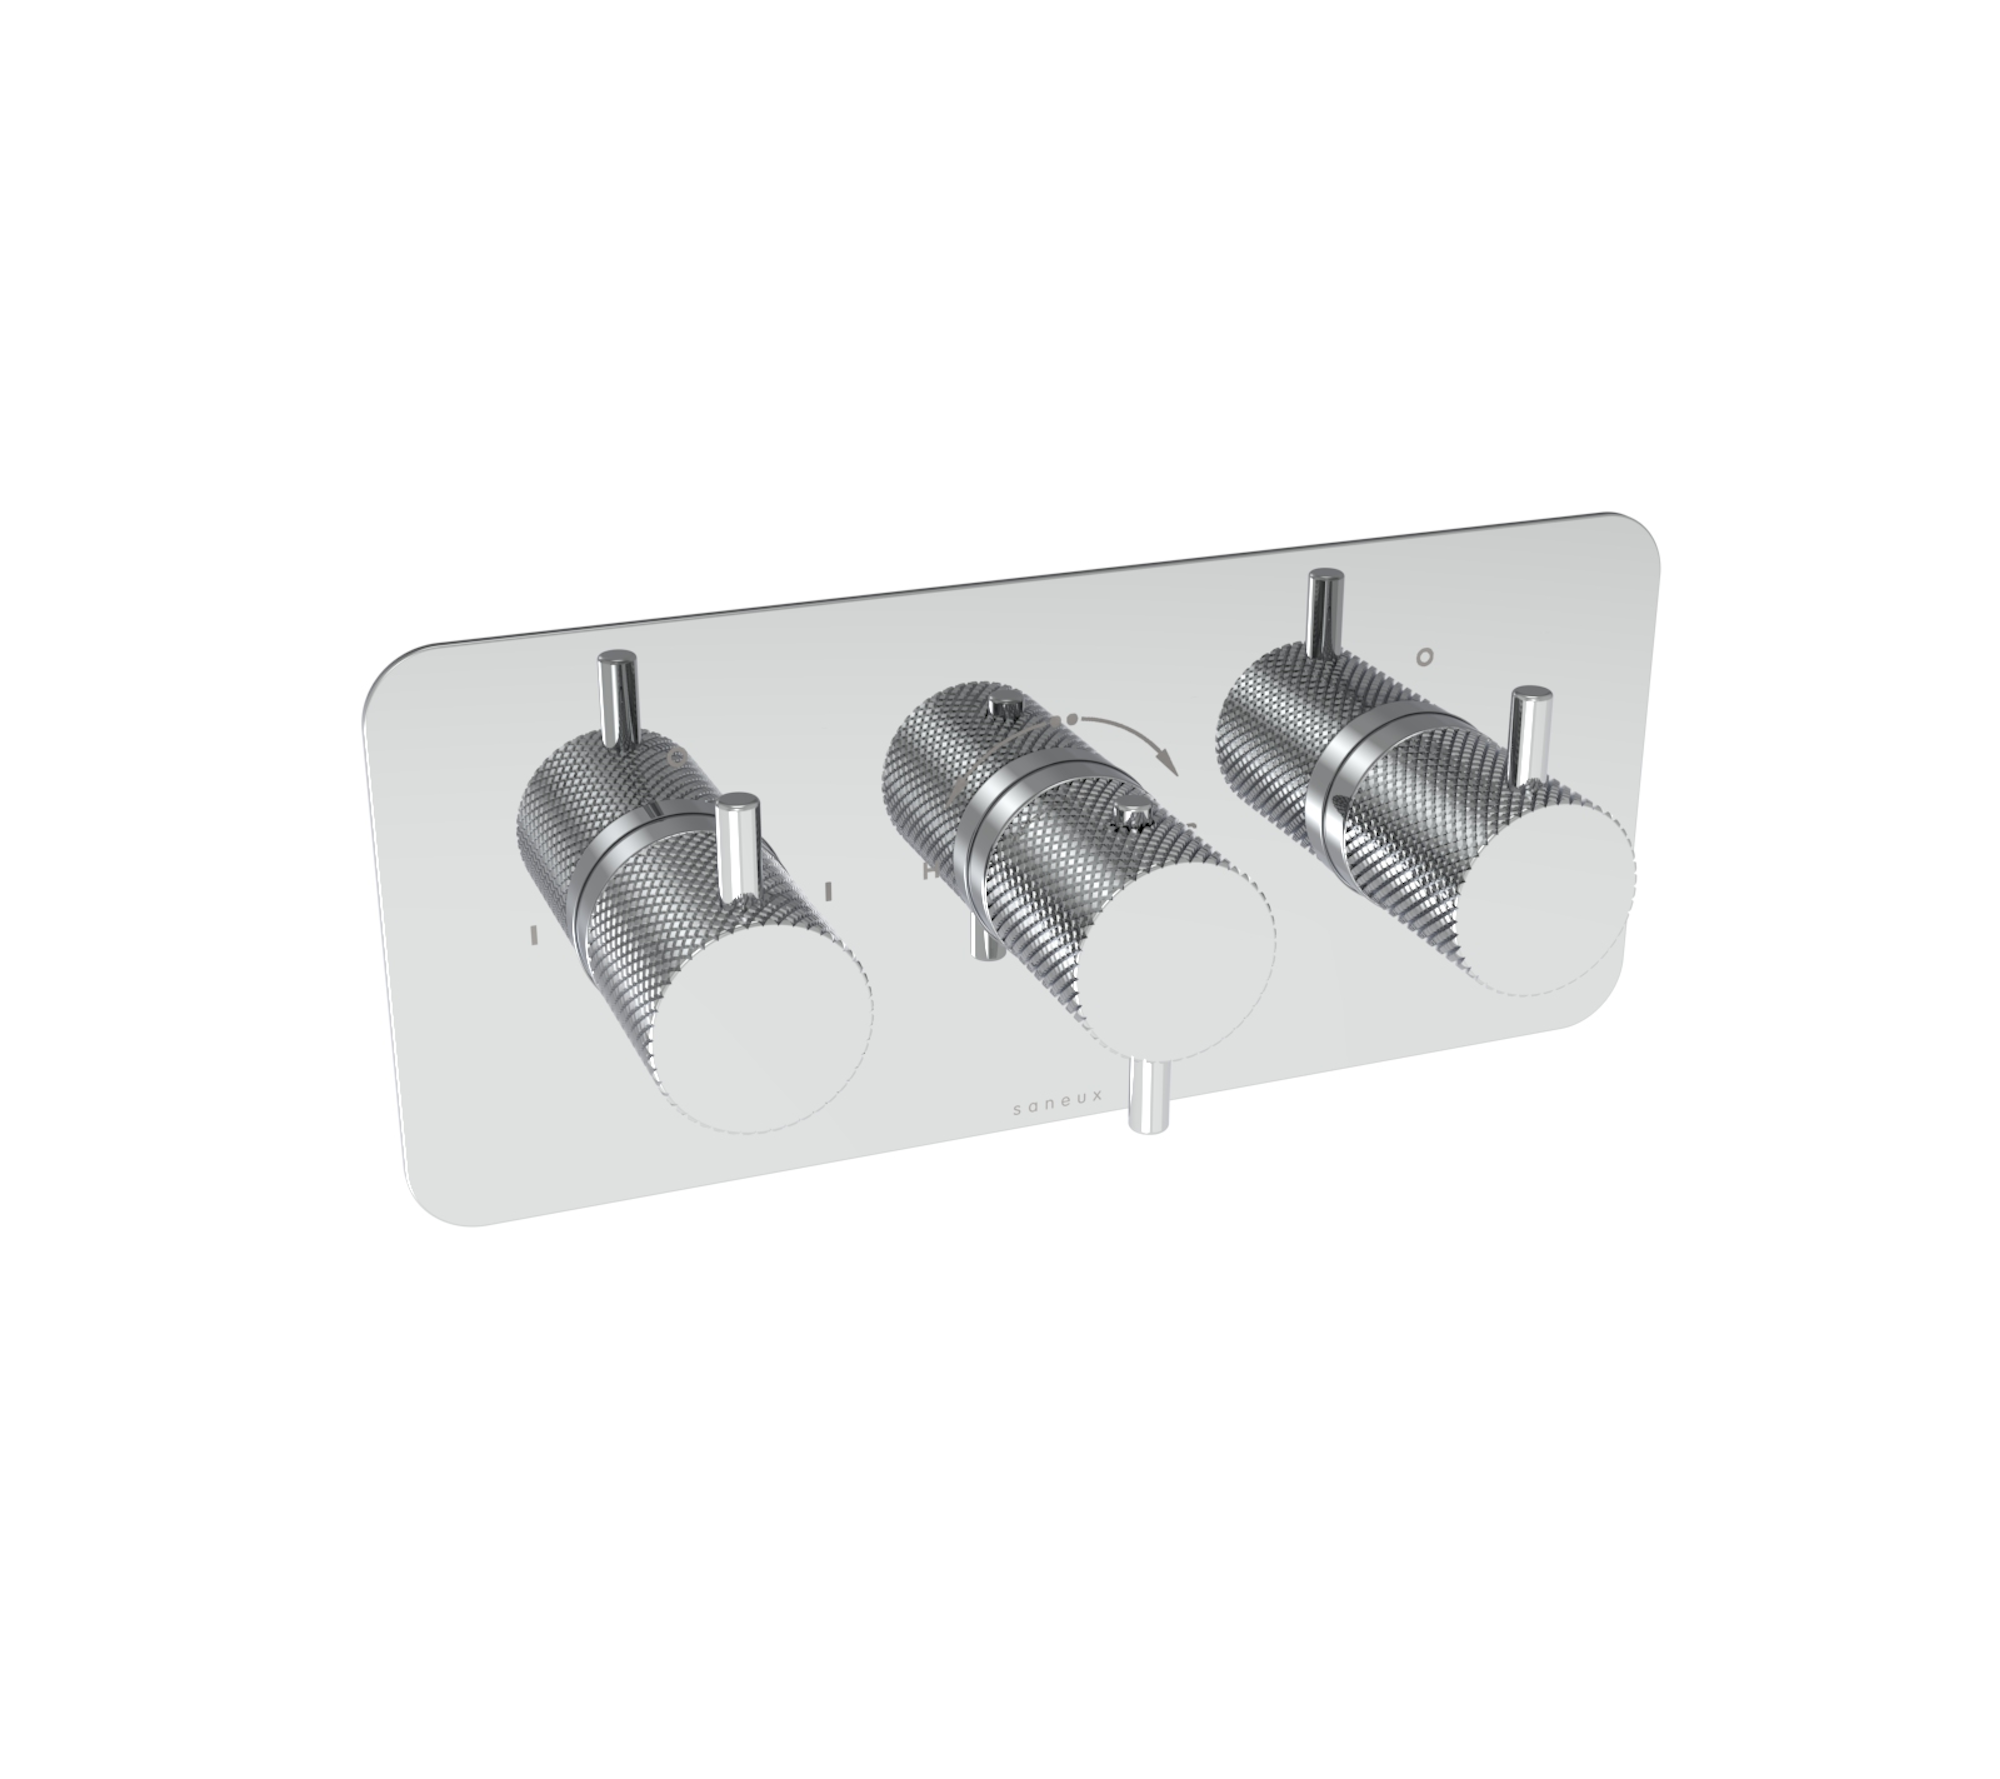 COS 2 way thermostatic low pressure shower valve kit in landscape with knurled handles - Chrome